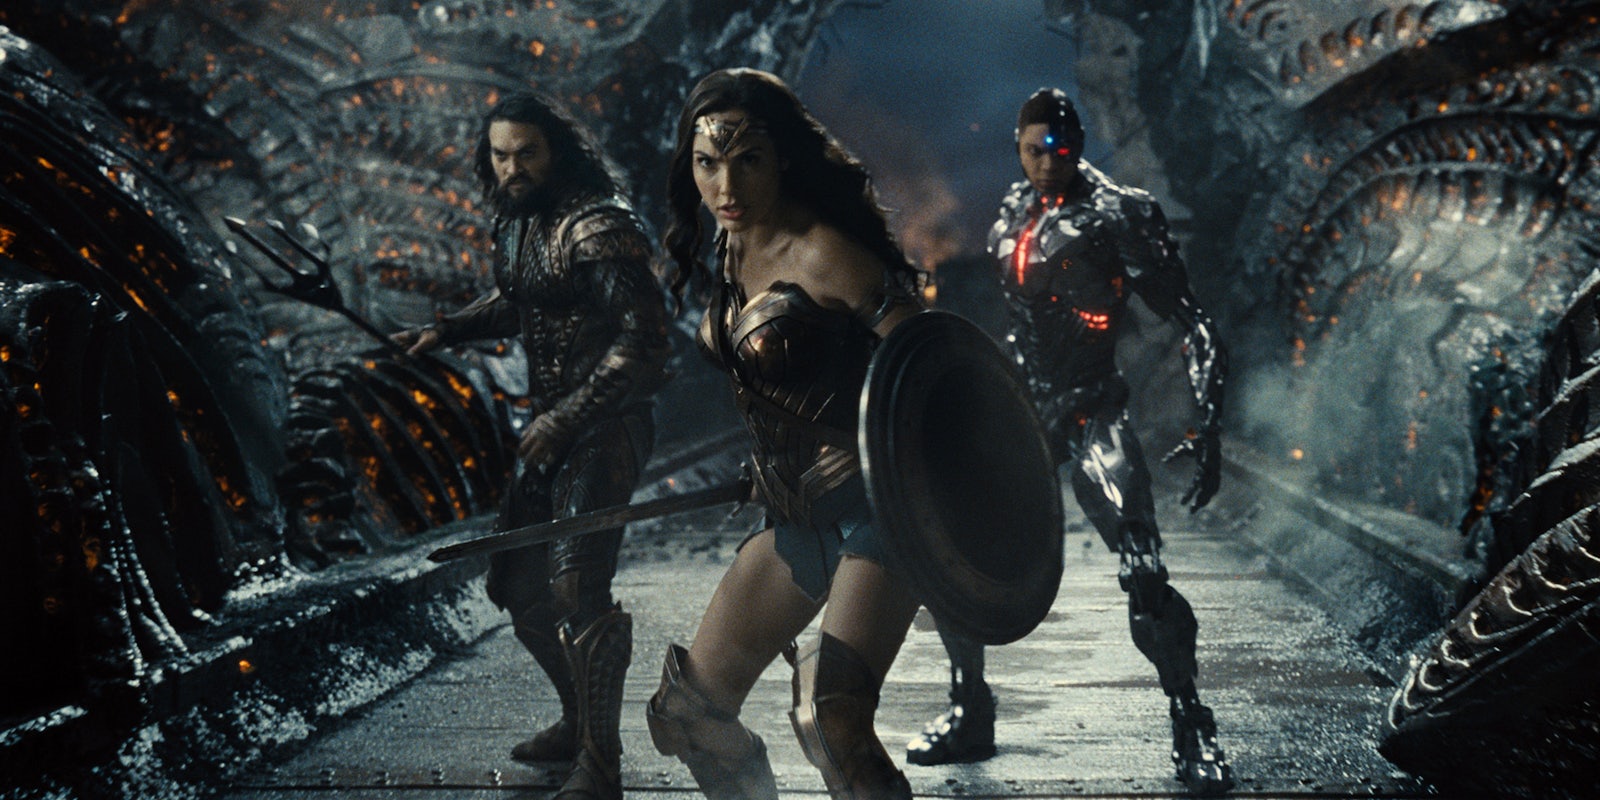 aquaman, wonder woman, and cyborg in zack snyder's justice league